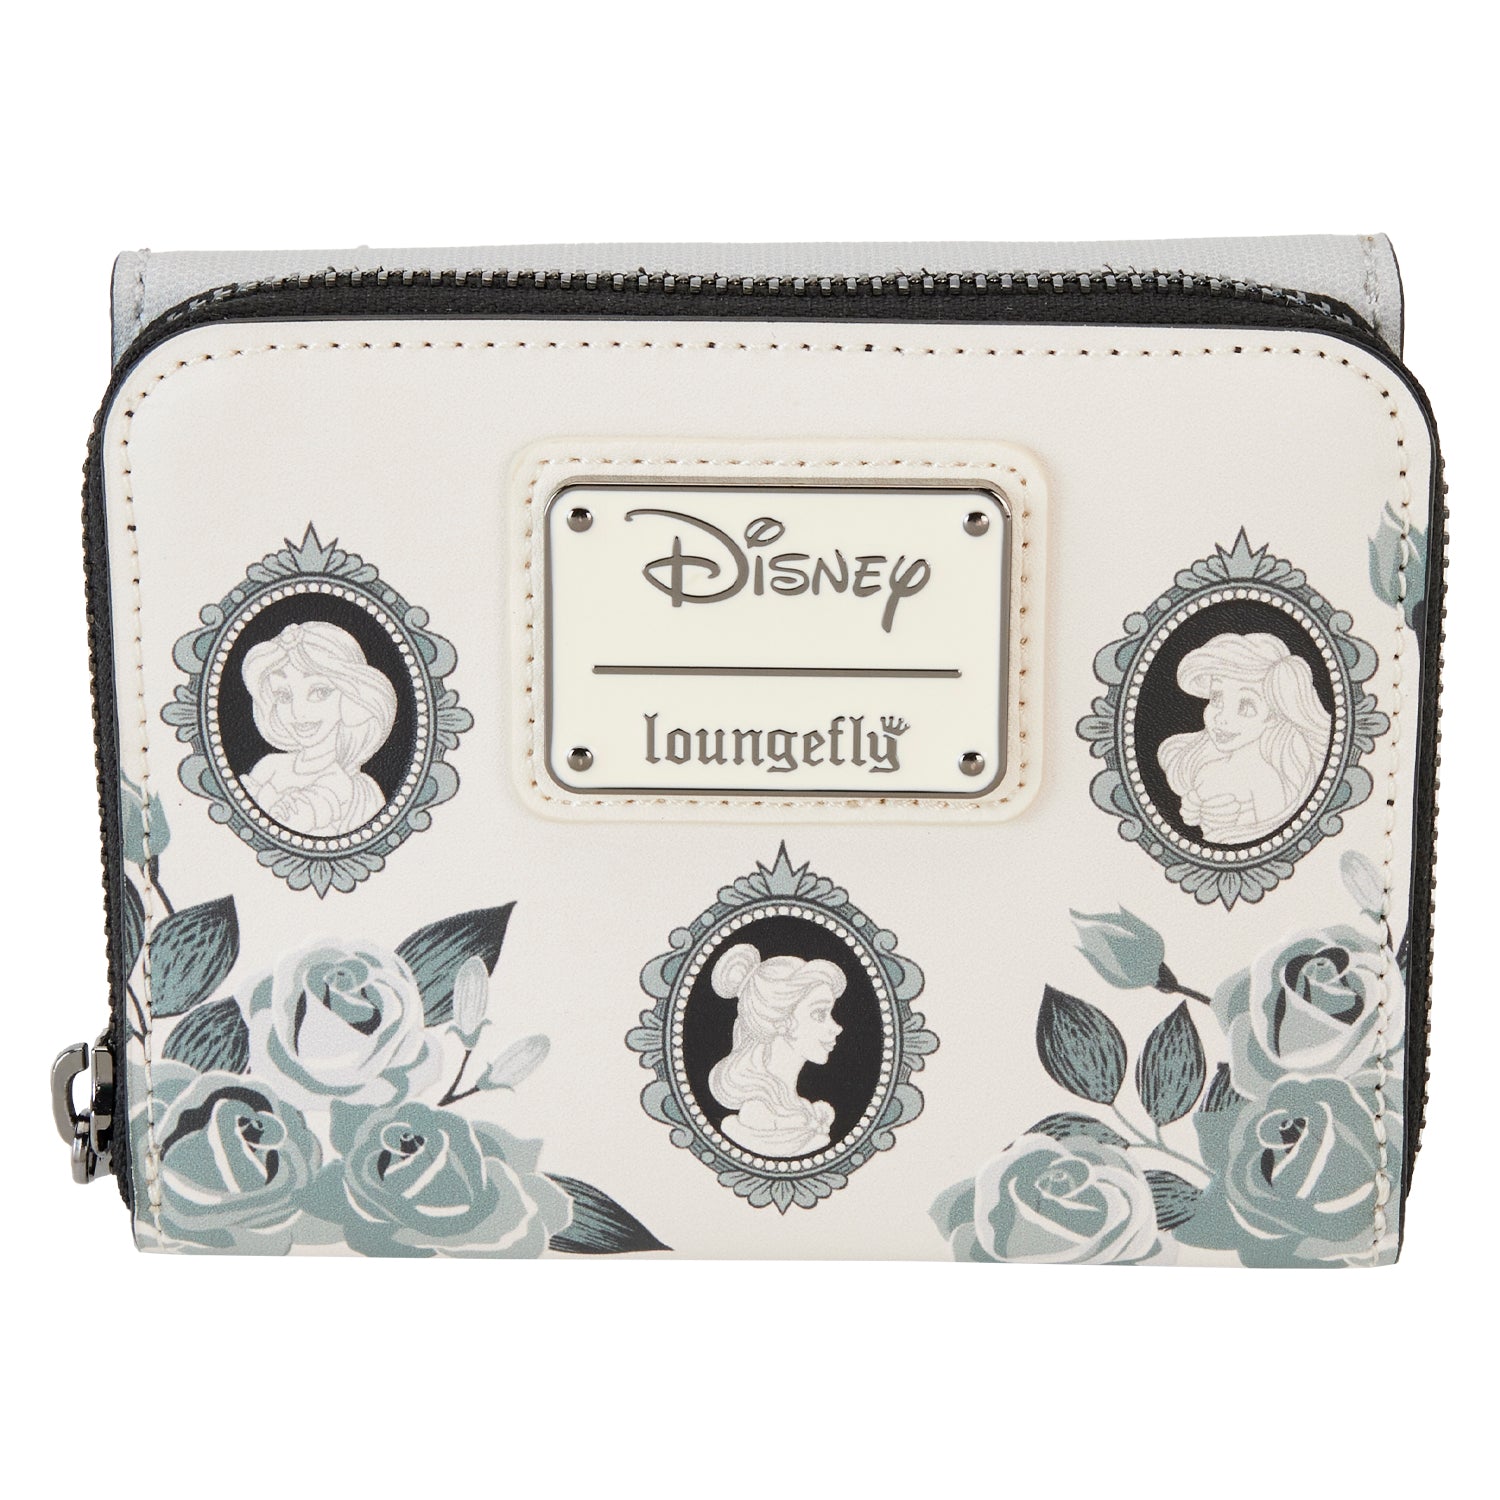 Loungefly Disney Princess Cameos Trifold Wallet